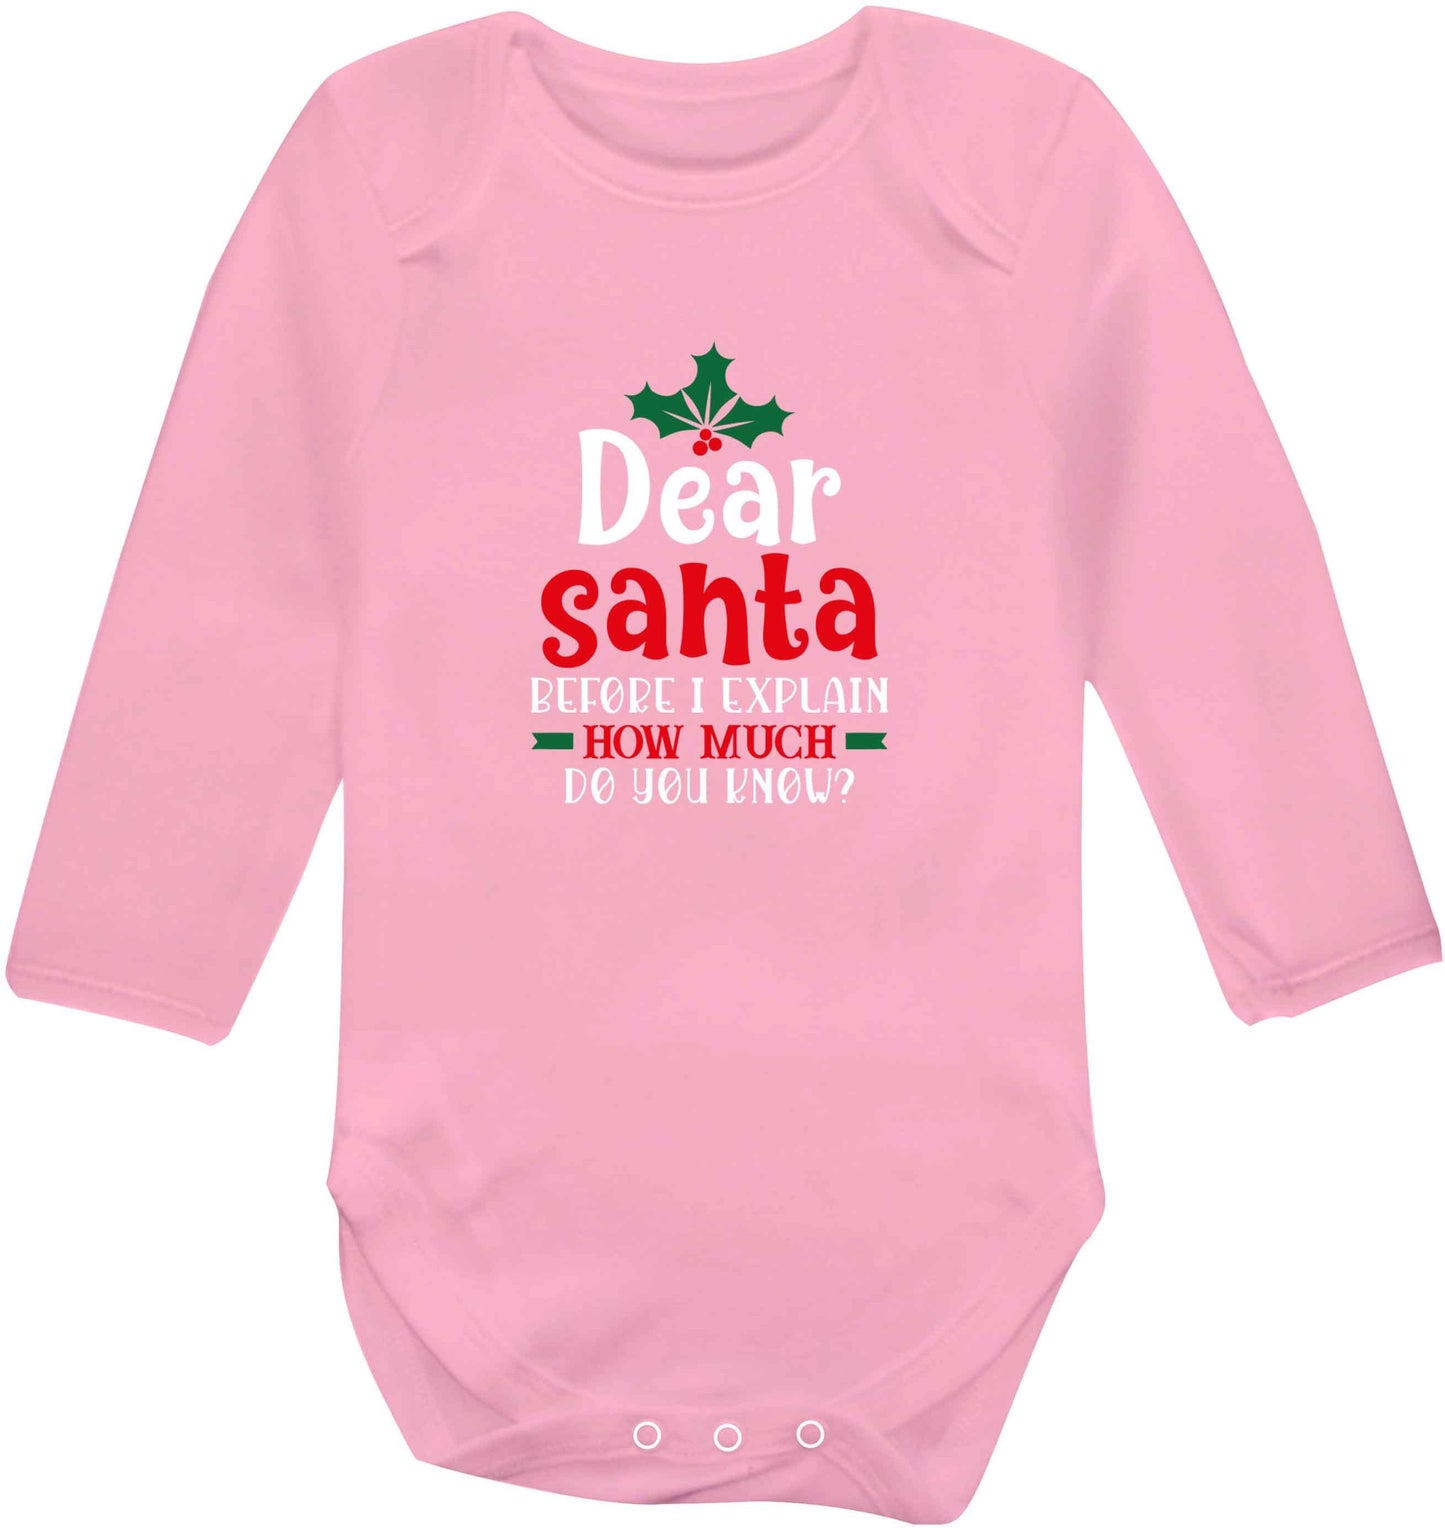 Santa before I explain how much do you know? baby vest long sleeved pale pink 6-12 months